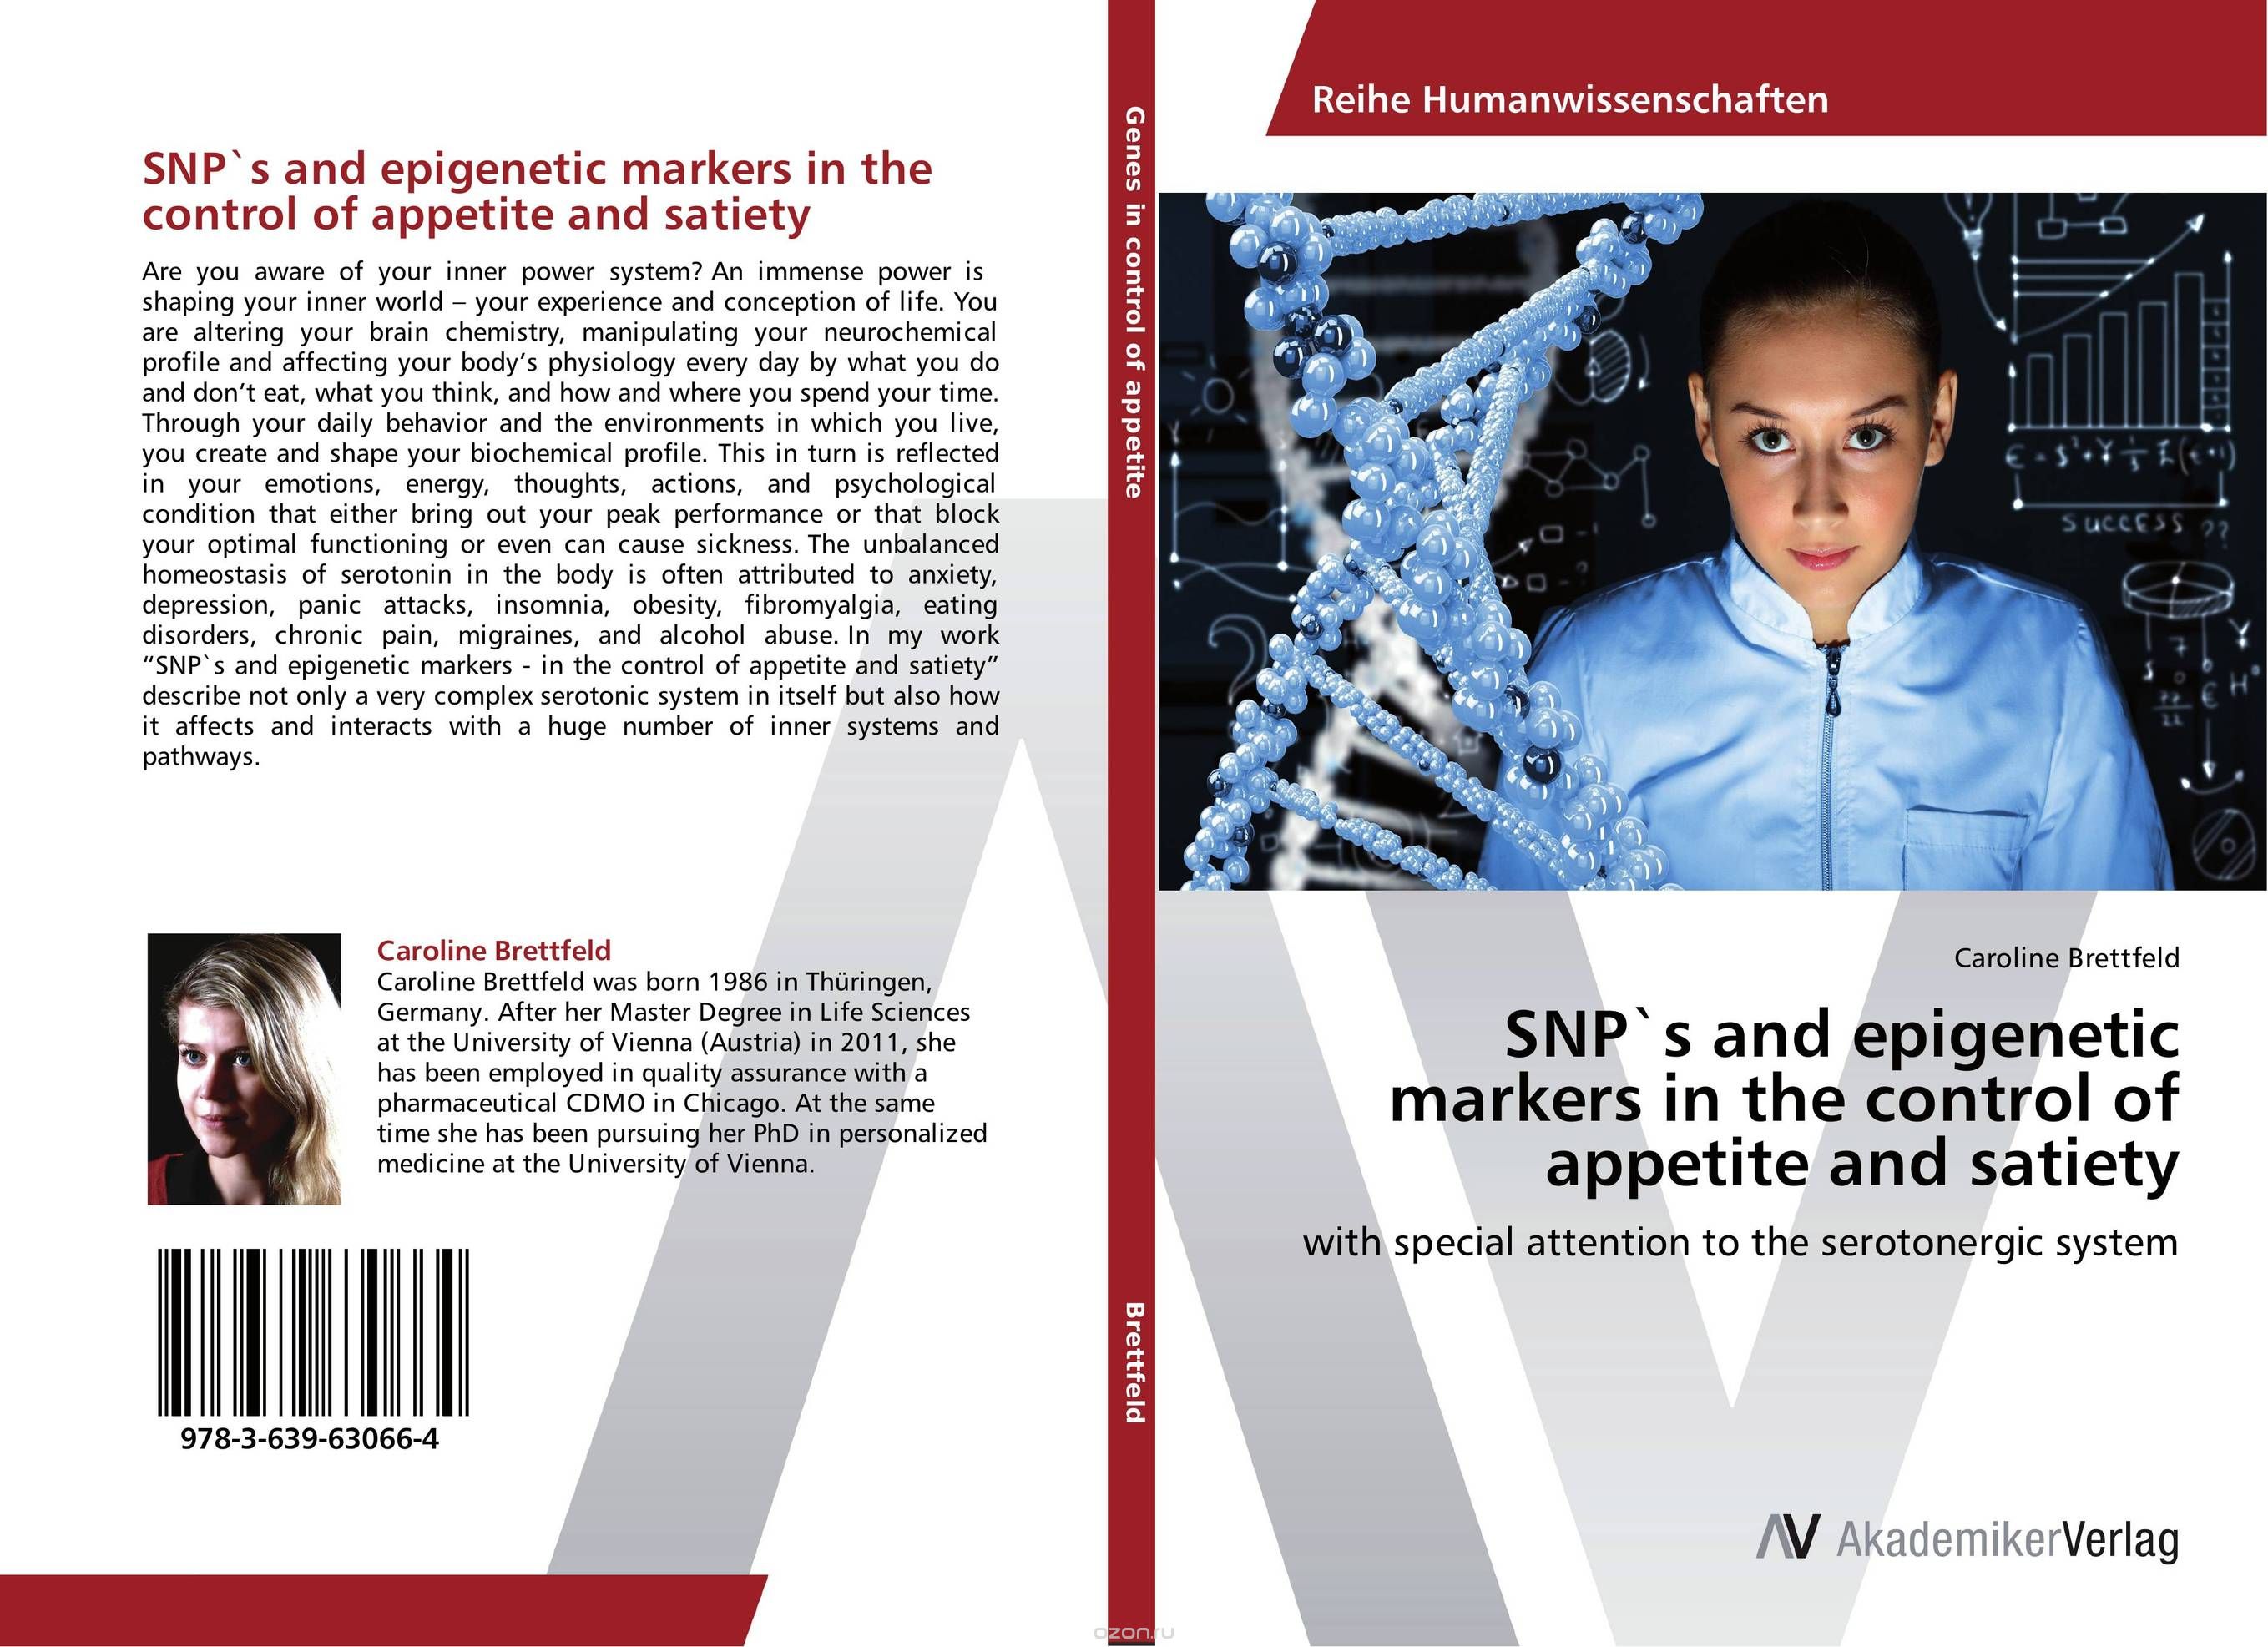 Скачать книгу "SNP`s and epigenetic markers in the control of appetite and satiety"